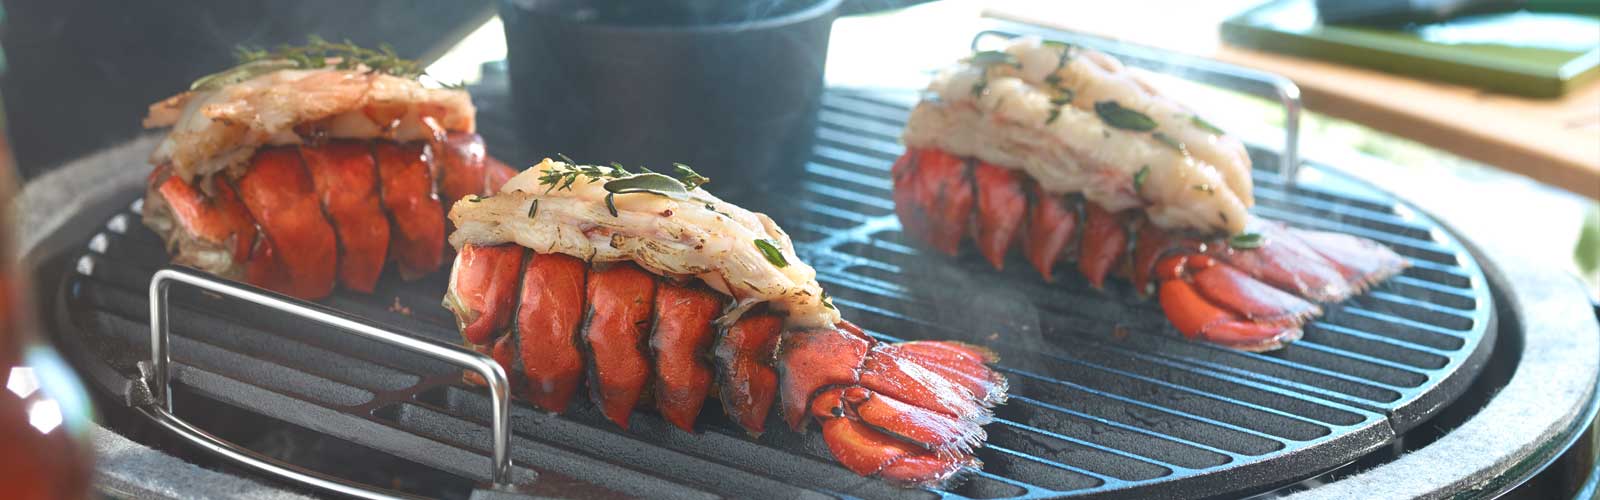 Grilled Lobster Tails With Smoked Caper Cream Big Green Egg